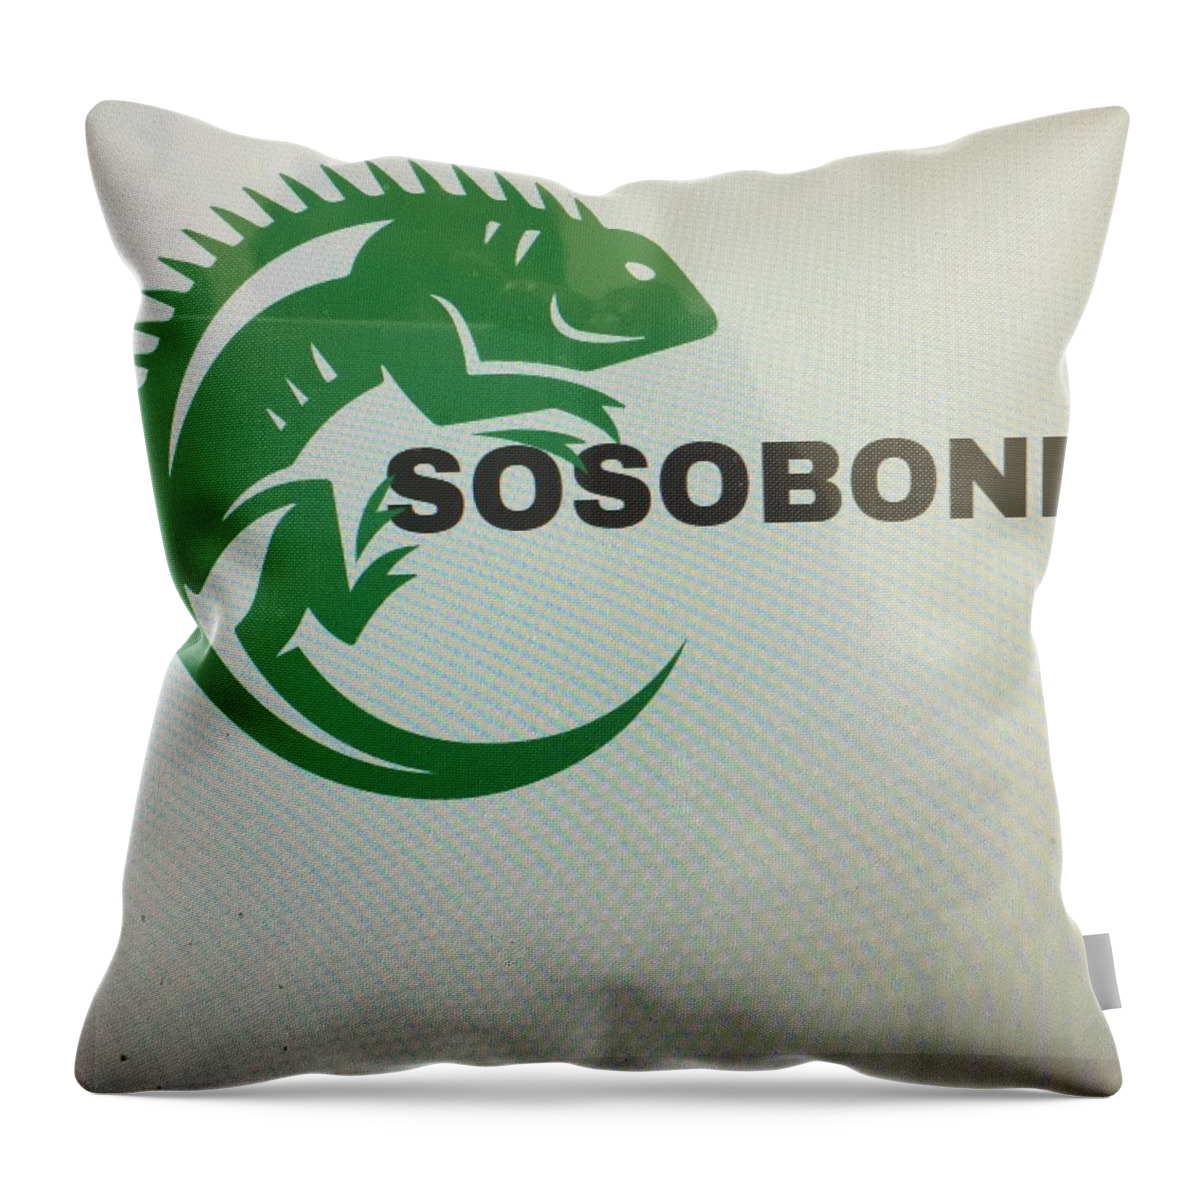  Throw Pillow featuring the photograph Sosobone $ by Trevor A Smith